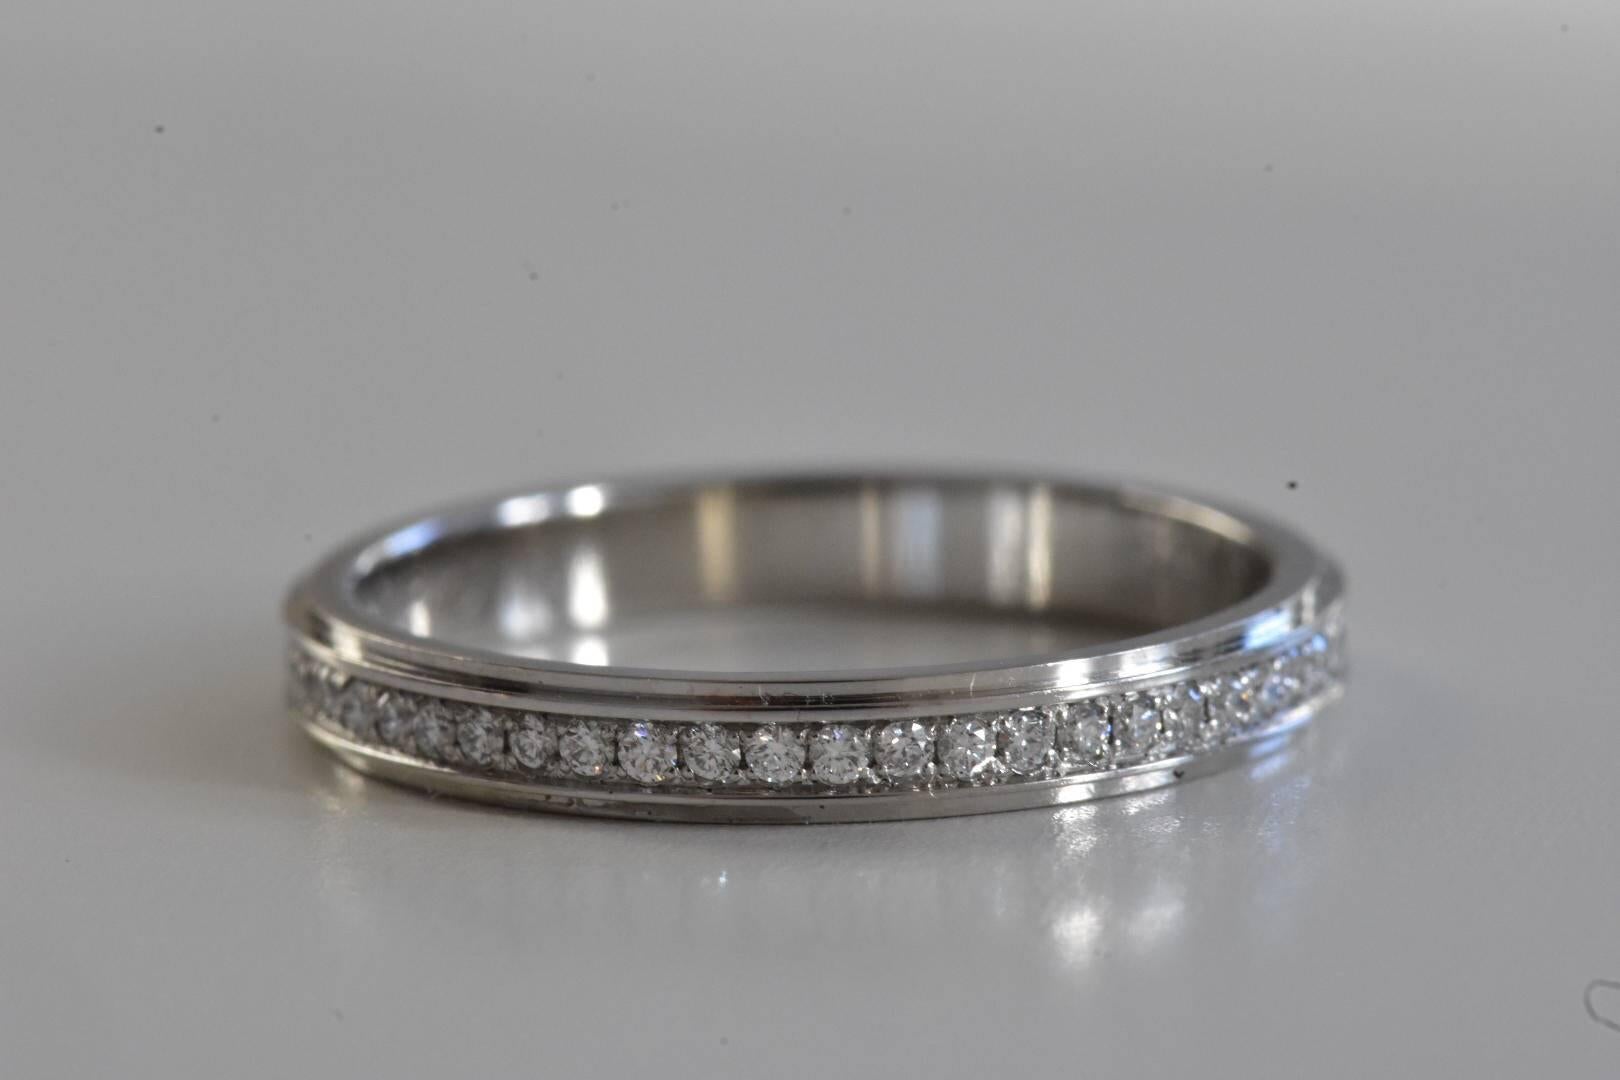 A Cartier platinum full circle diamond eternity. The ring feature brilliant-cut round diamonds of approx
Ring size:UK H, US 3 3/4, EU 46
Measurements: ring is 2.2mm wide
Diamonds: Full circle of diamonds approx 0.20
Hallamarks: Cartier, pt950, 46,